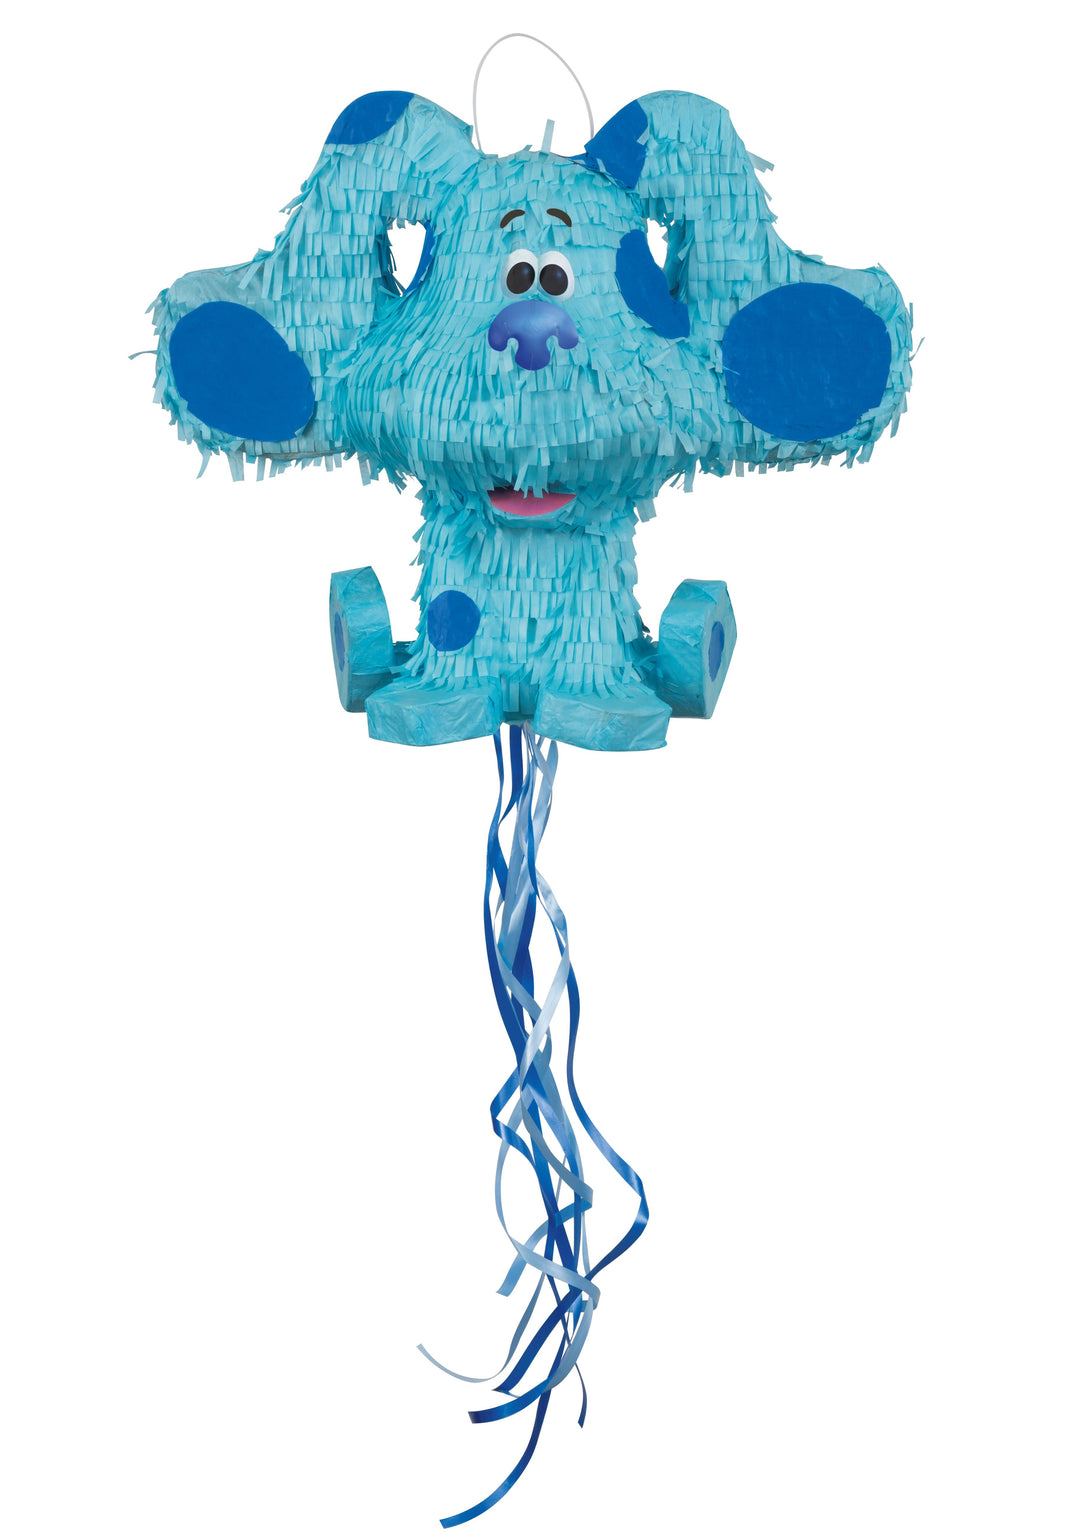 Uncover Fun Surprises with Our Blue's Clues Pinata – Perfect for a Playful Party!